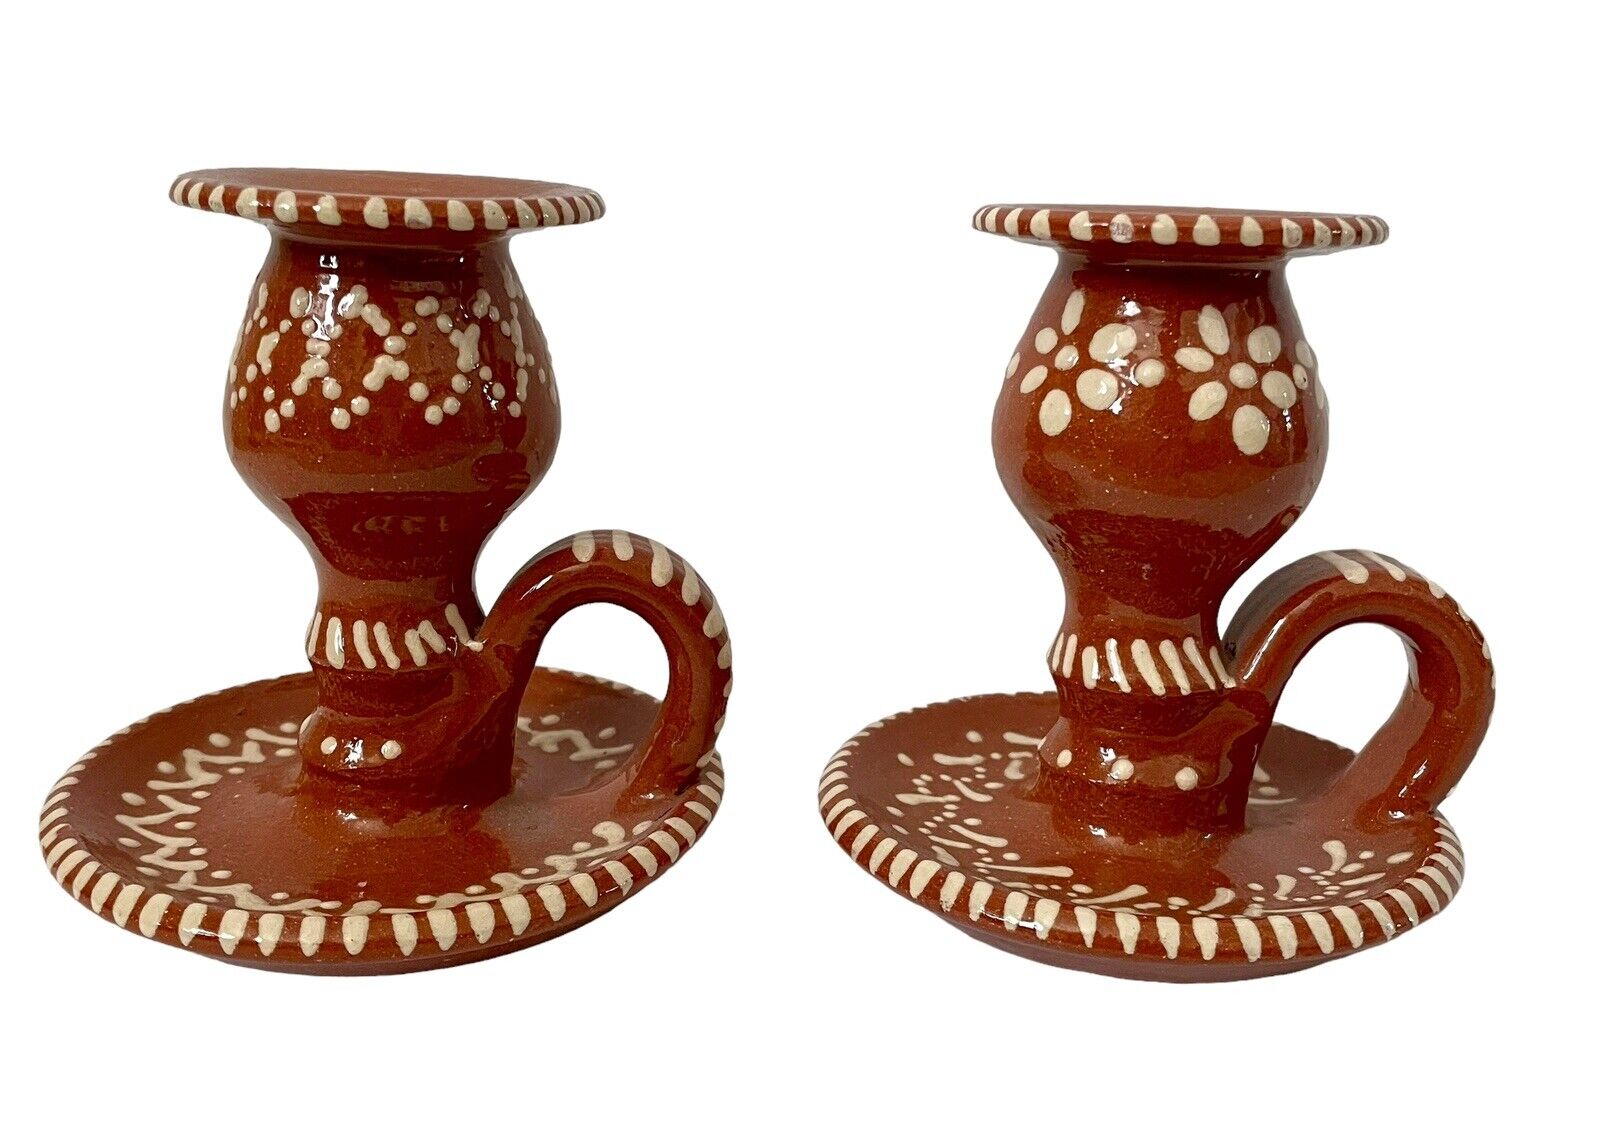 Pair Of Redware Hand-Painted Redware Ceramic Chamber-sticks Candleholders